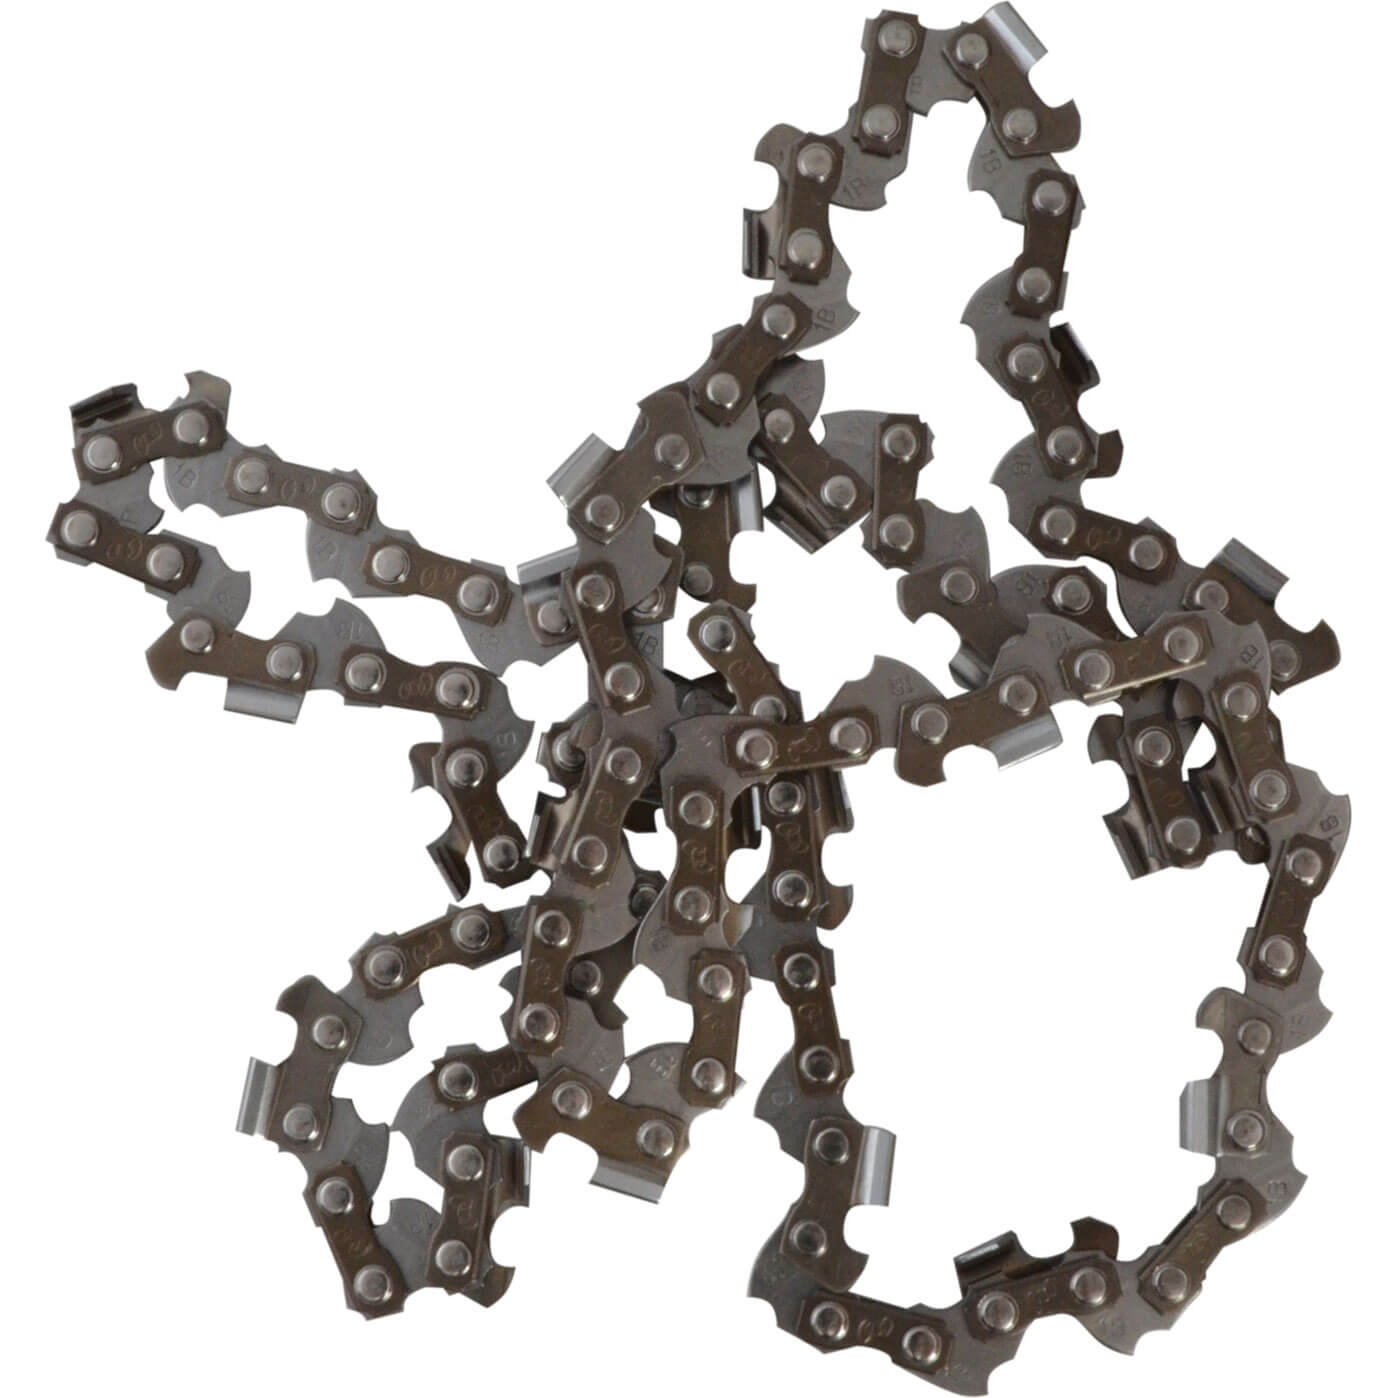 Image of ALM Chainsaw Chain 3/8" x 53 Links for 350mm Bars on Ikra Red PCS 3835, PCS3835 350mm